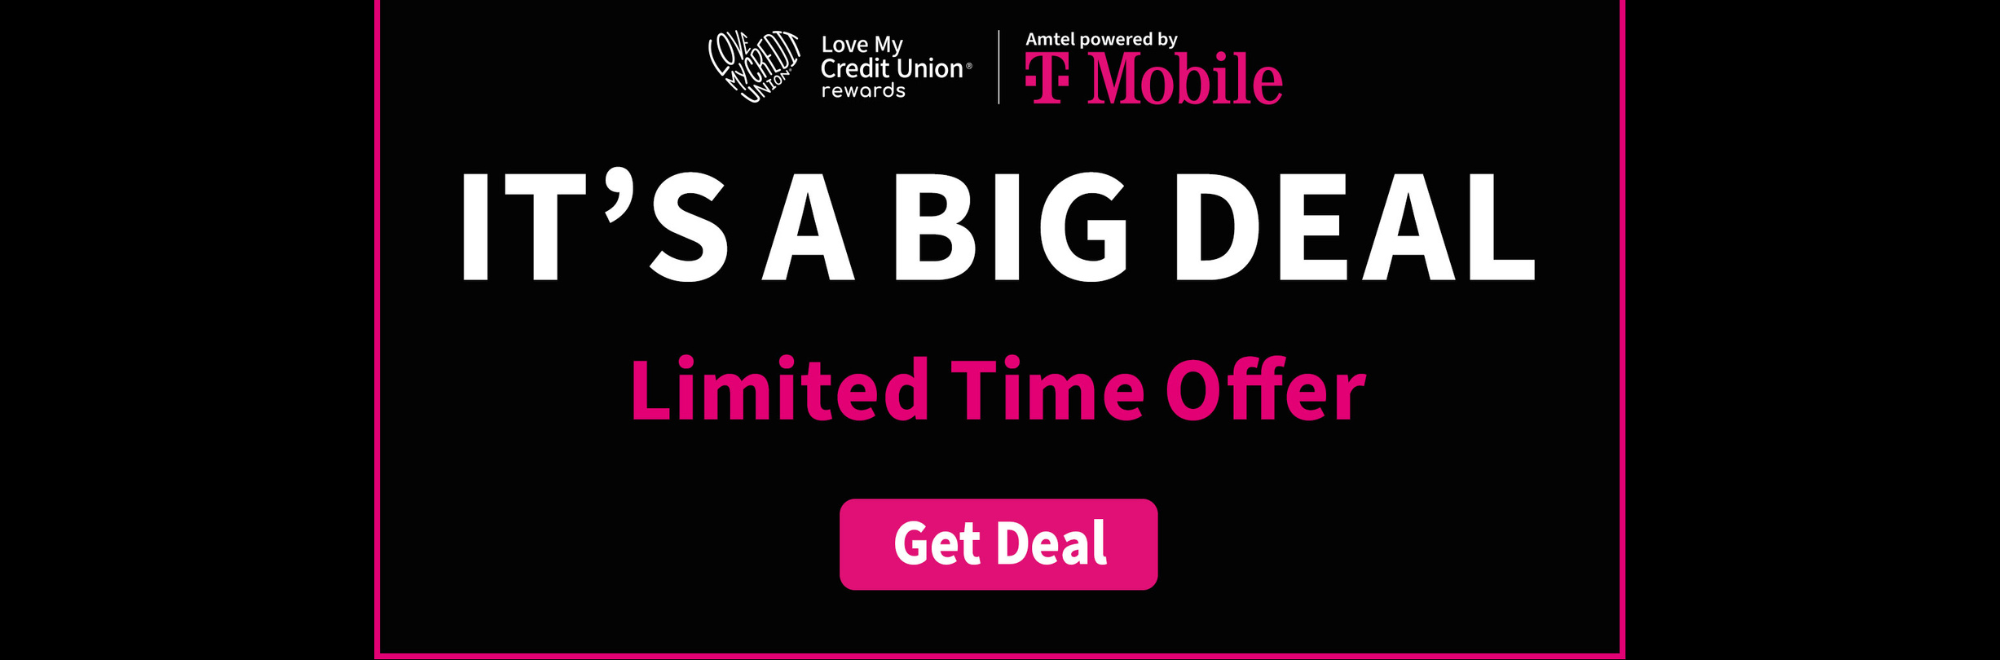 Limited time special member offer from T-Mobile